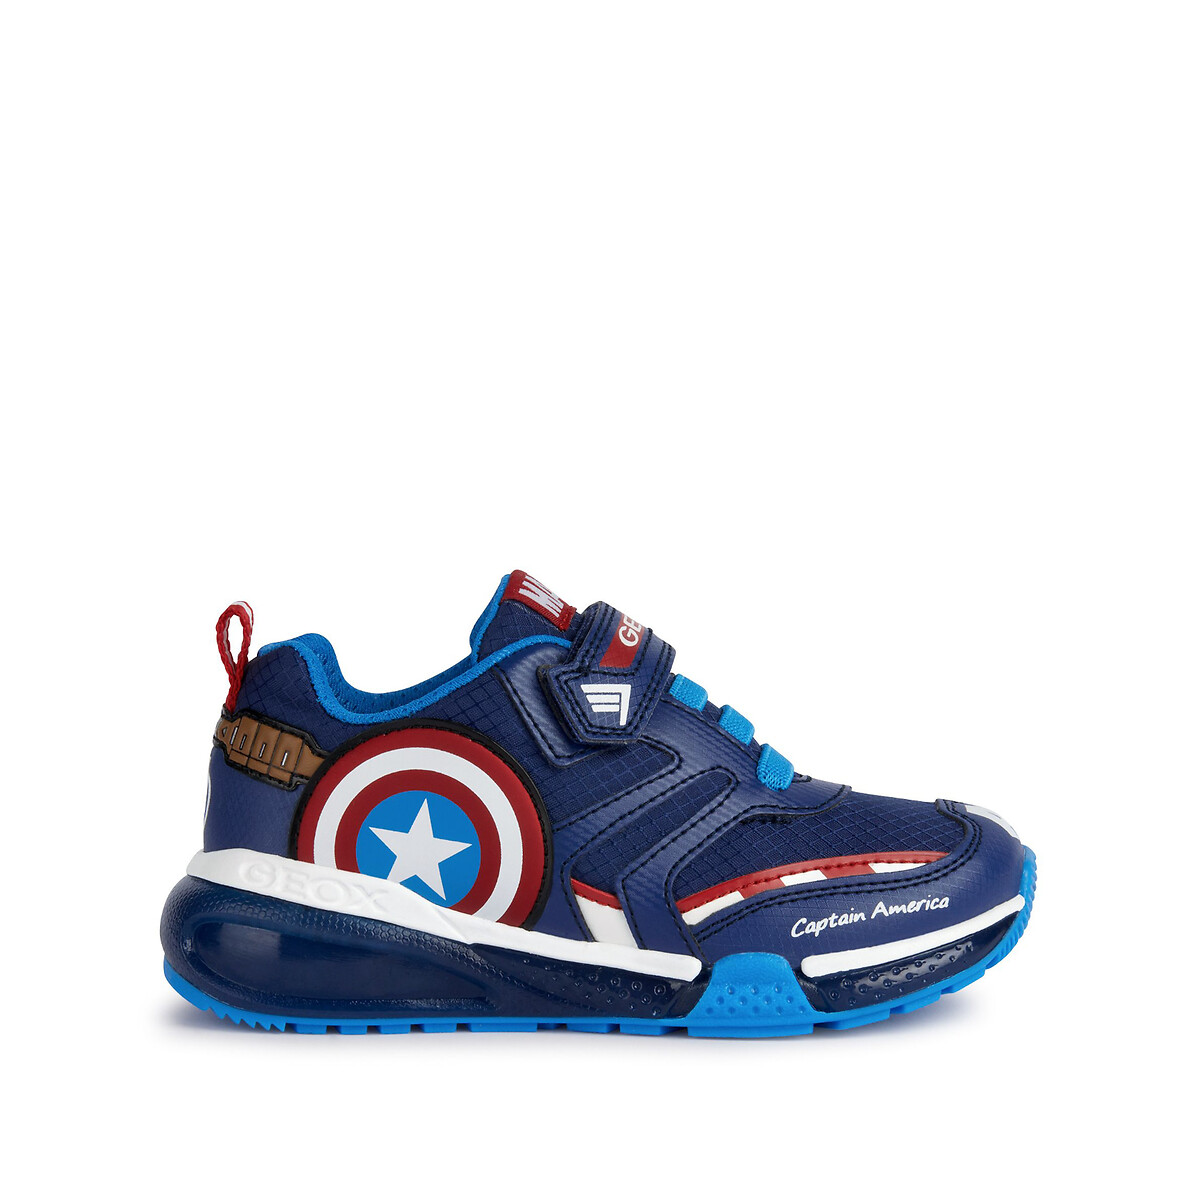 Sneakers Bayonic x Captain America mit LED von Geox